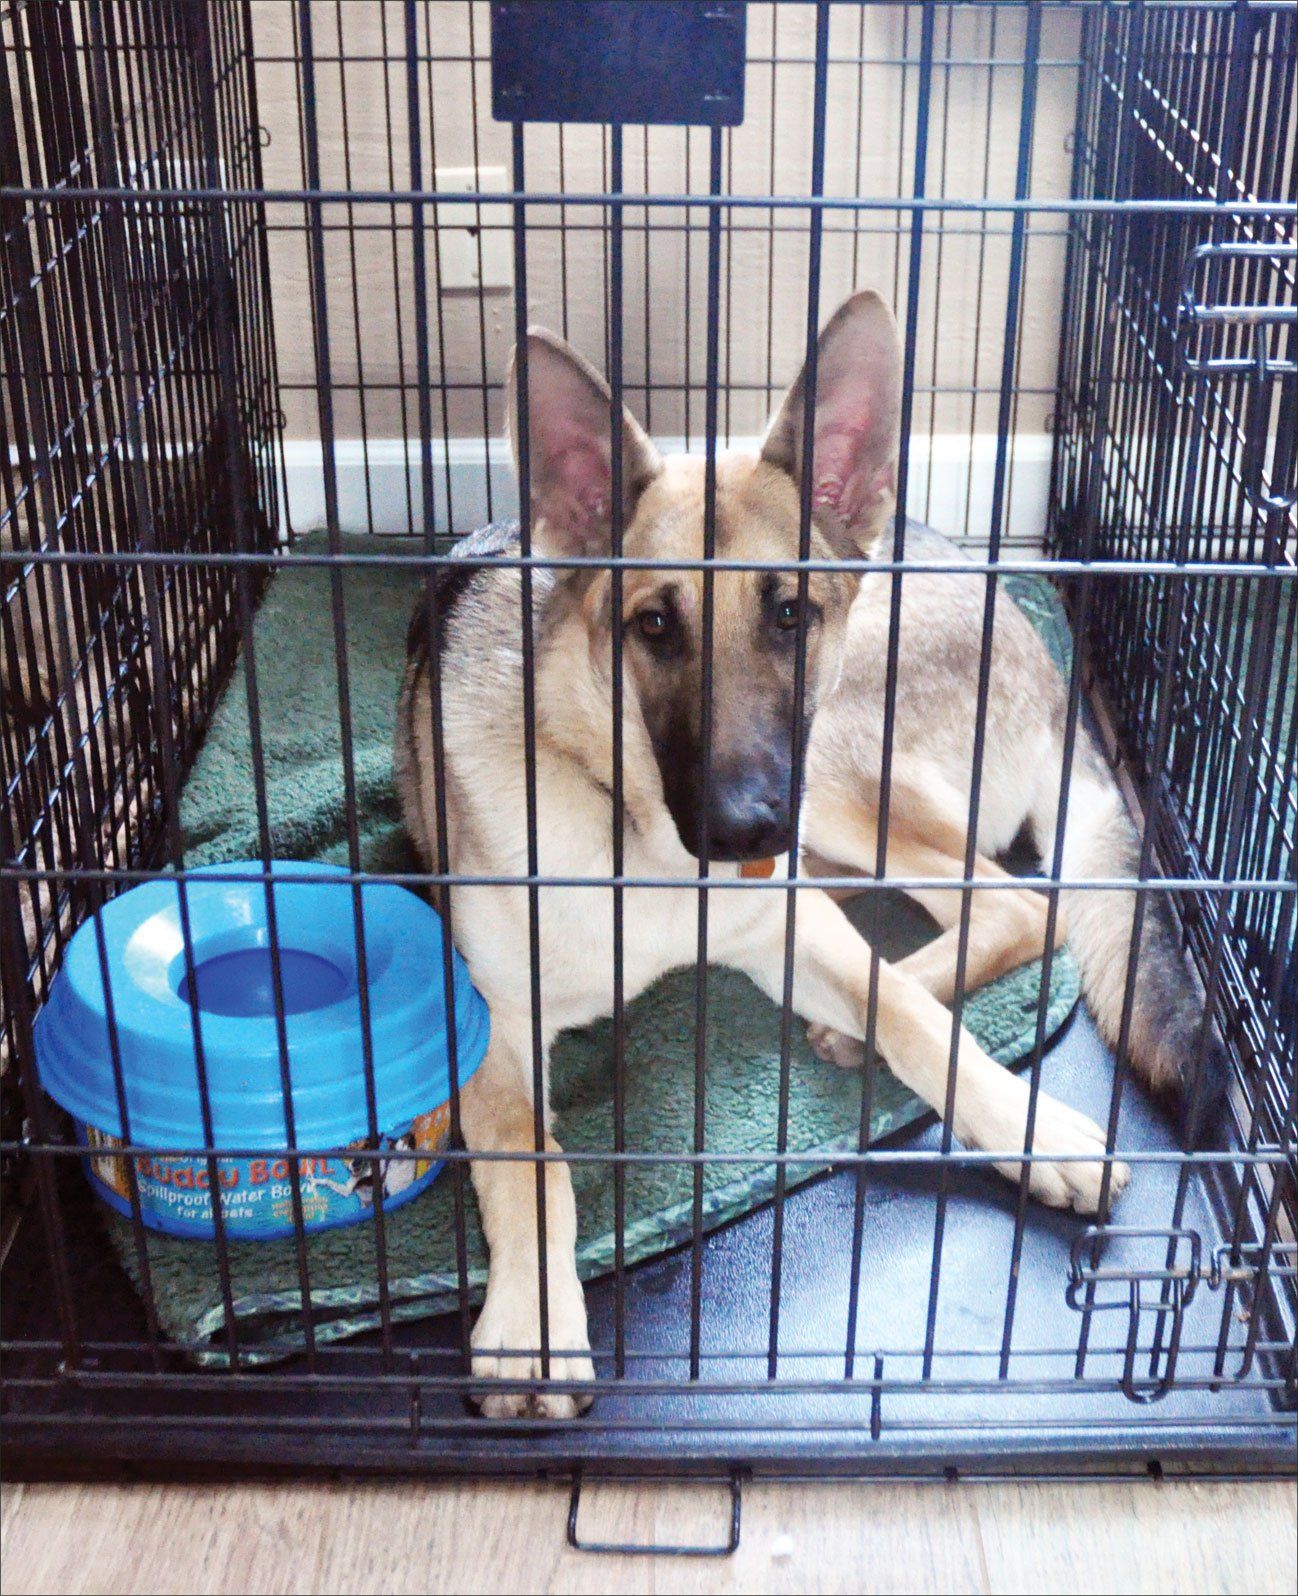 How to Keep a Dog Busy in a Crate: 7 Vet Approved Ideas